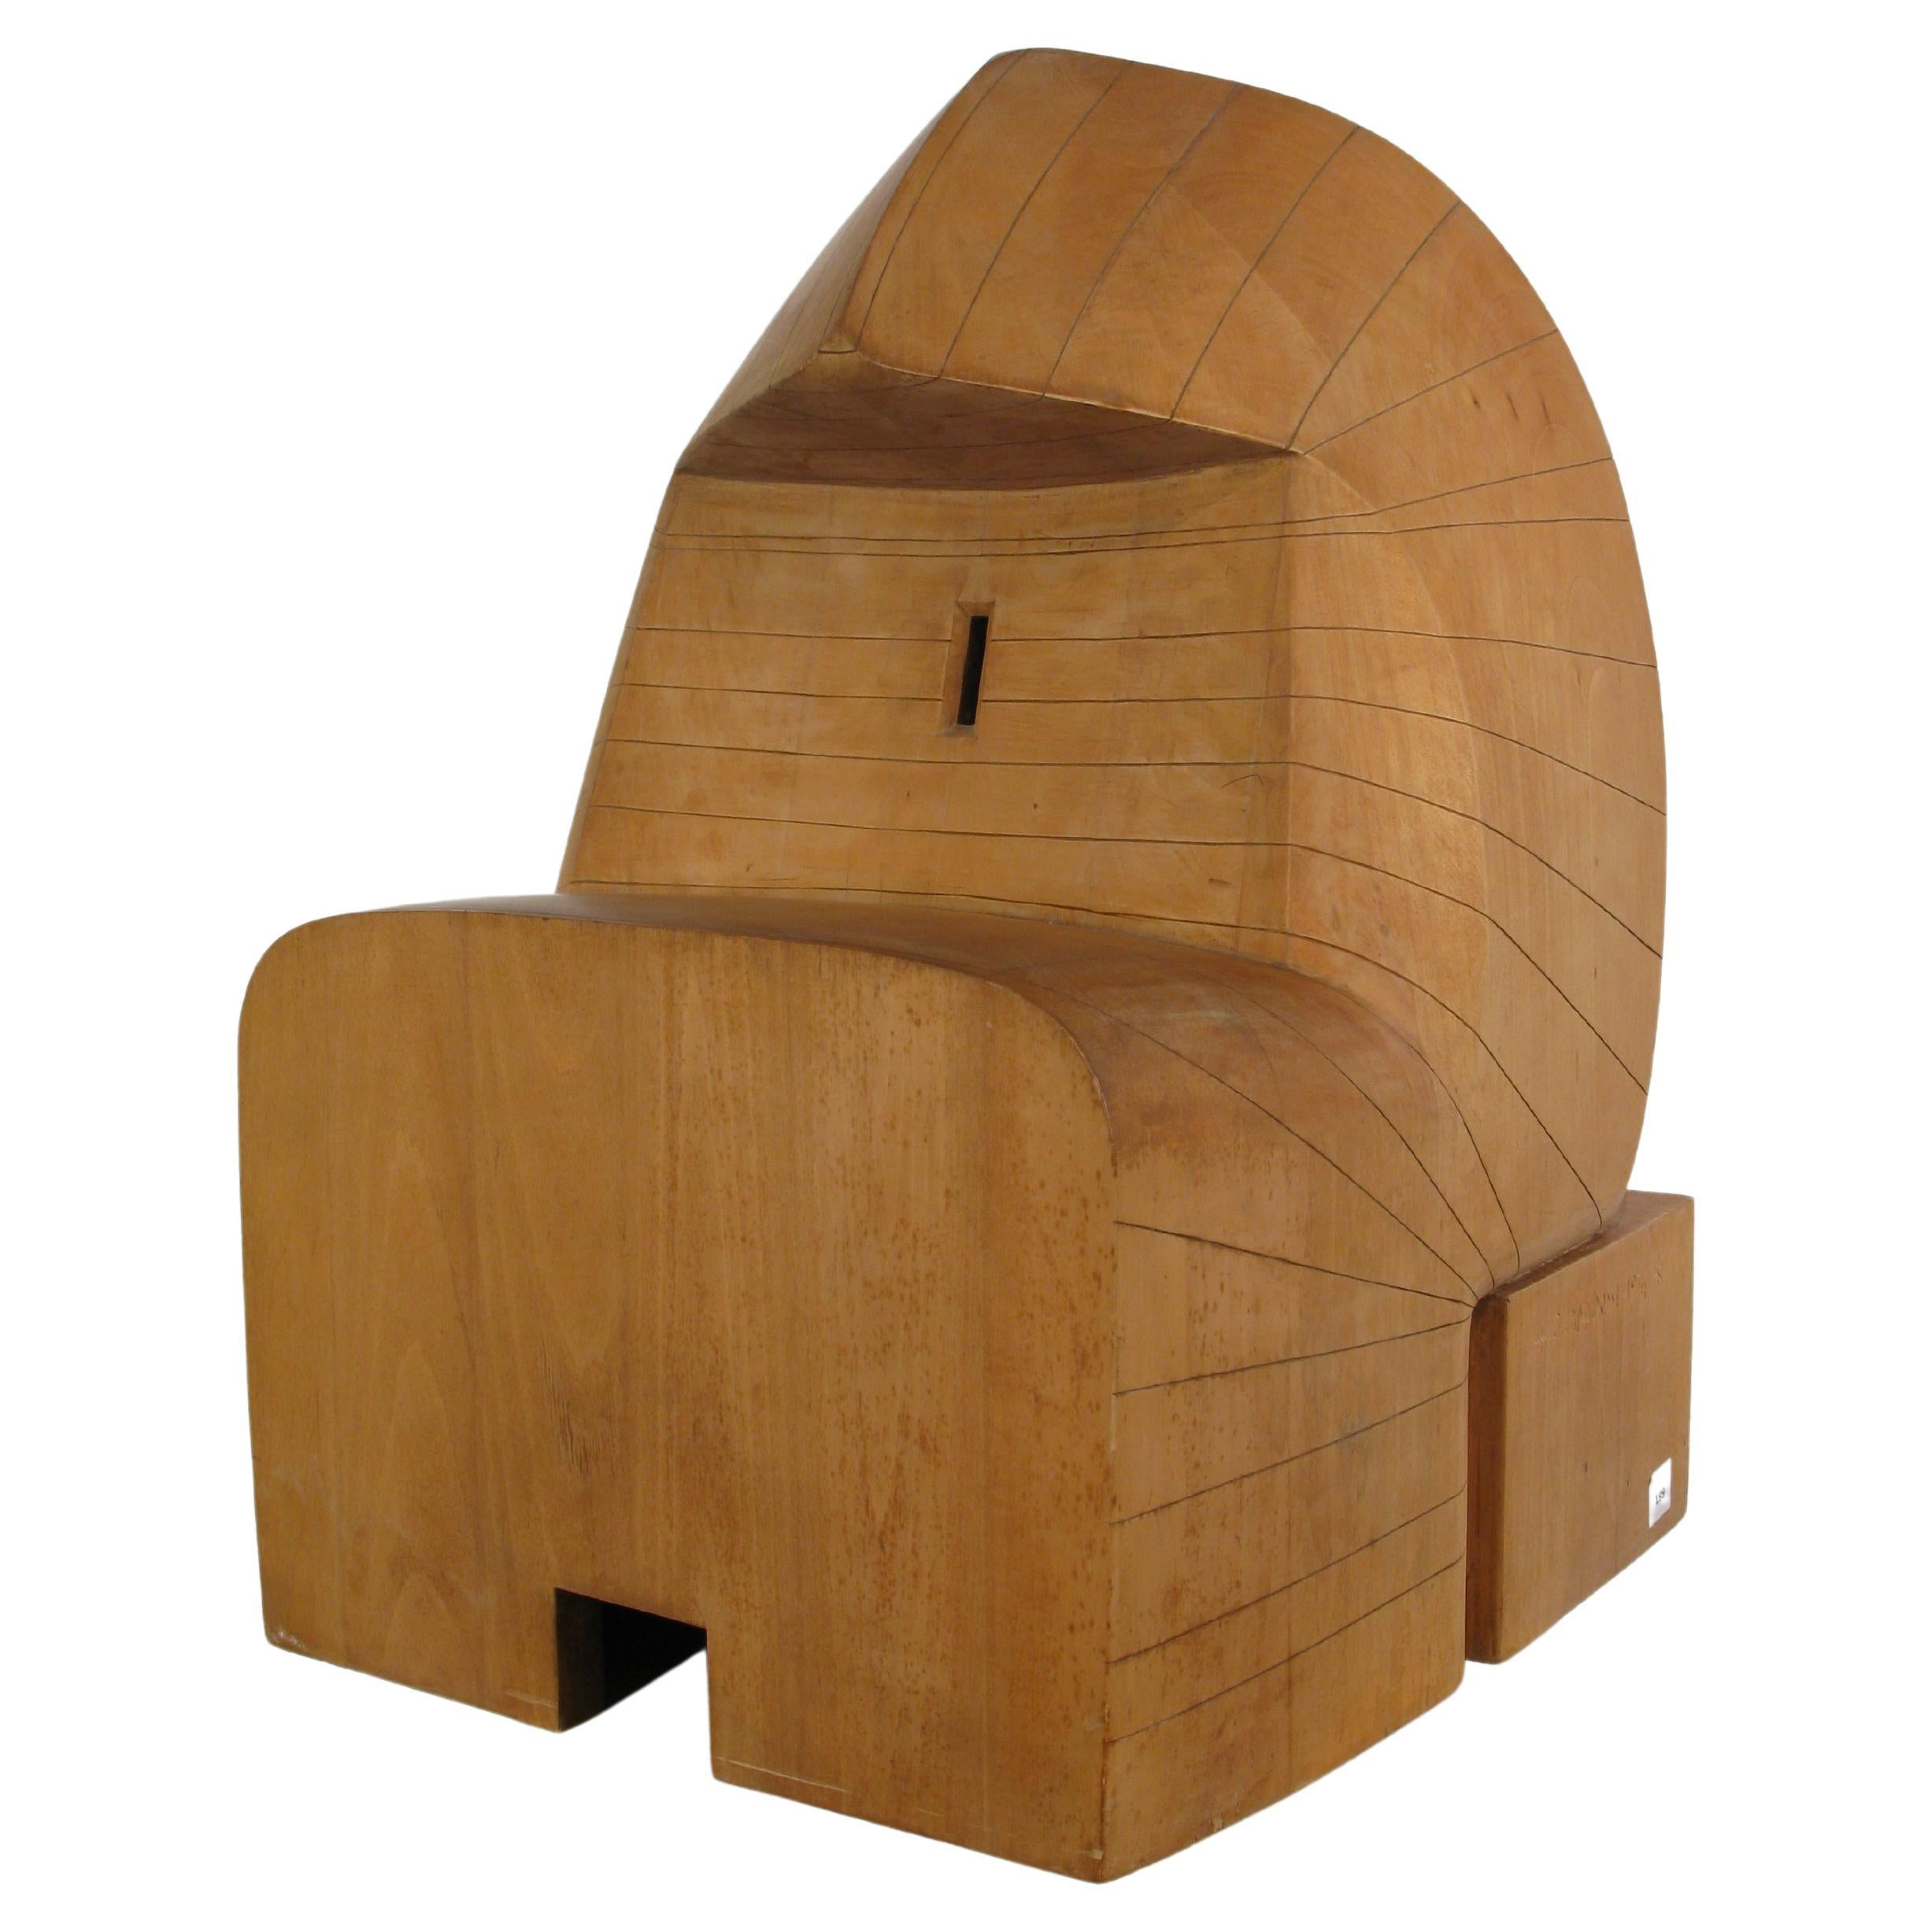 Giuseppe Rivadossi (Nave, July 8, 1935)  Shed, 1974 Wood sculpture For Sale